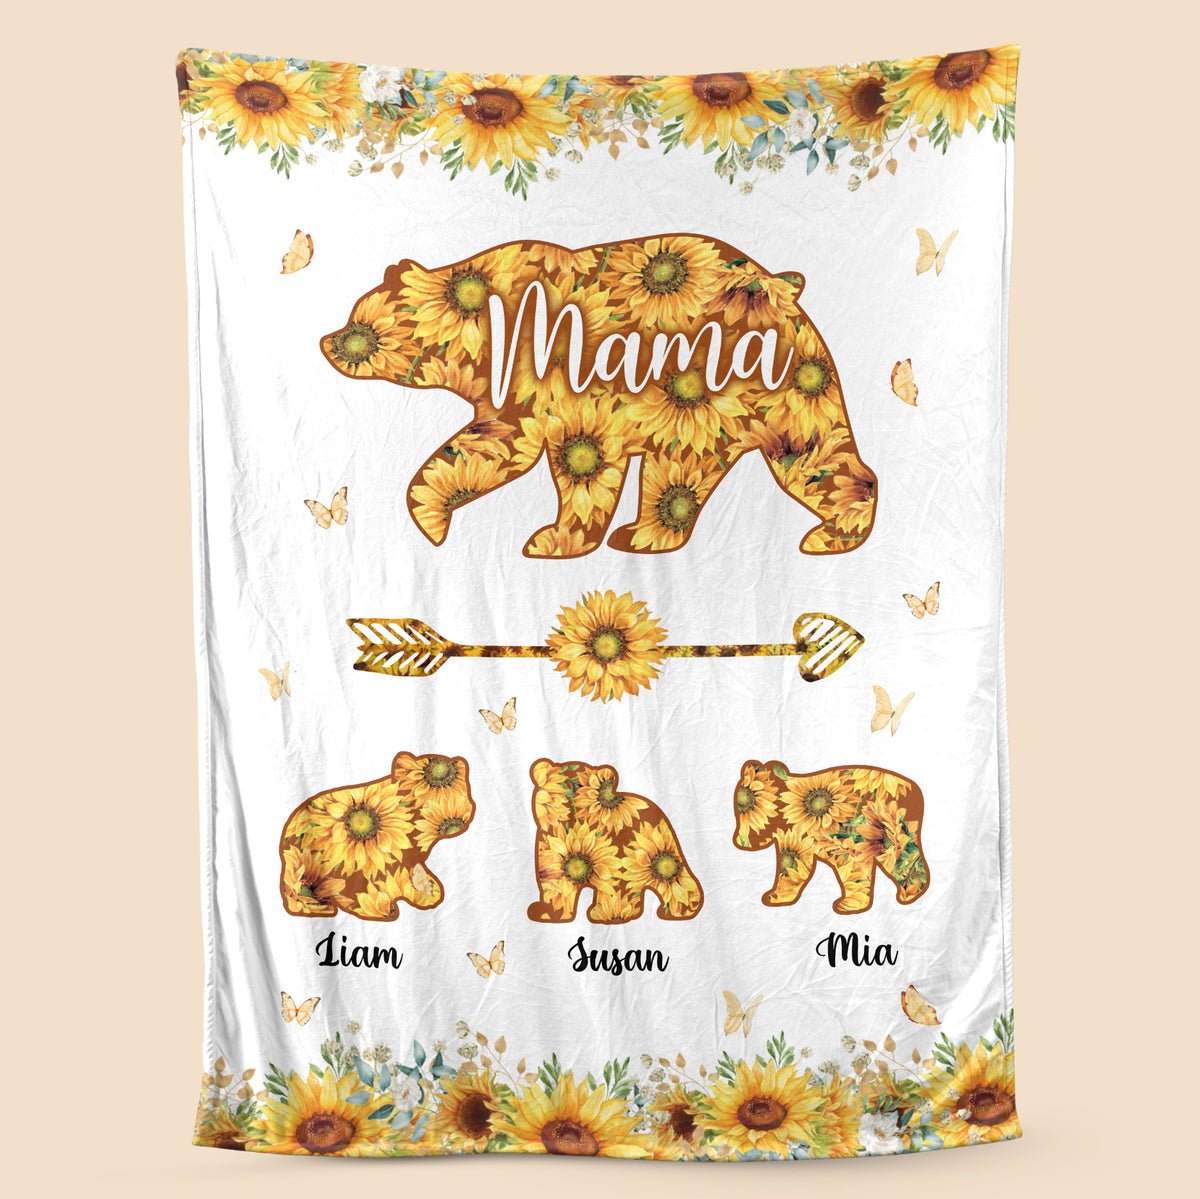 https://cdn.shopify.com/s/files/1/0640/1861/2460/products/mama-bear-sunflower-personalized-blanket-best-gift-for-mother-709045_1600x.jpg?v=1693906528